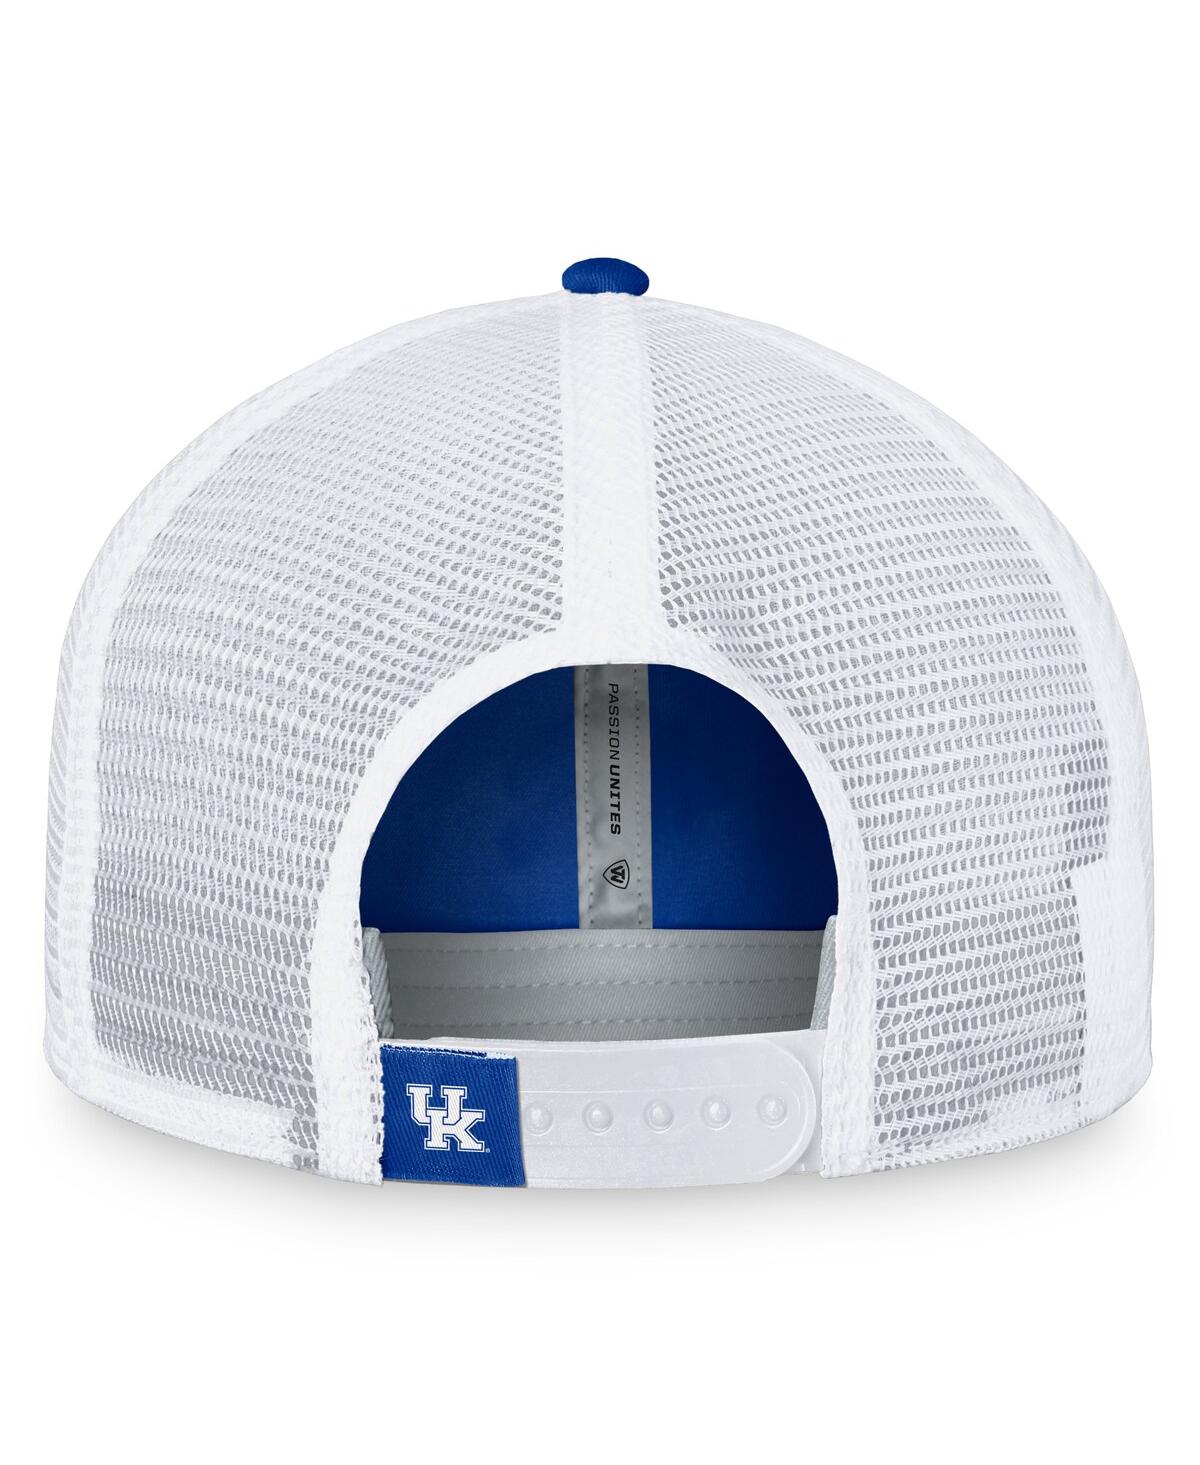 Shop Top Of The World Women's  Royal, White Kentucky Wildcats Charm Trucker Adjustable Hat In Royal,white